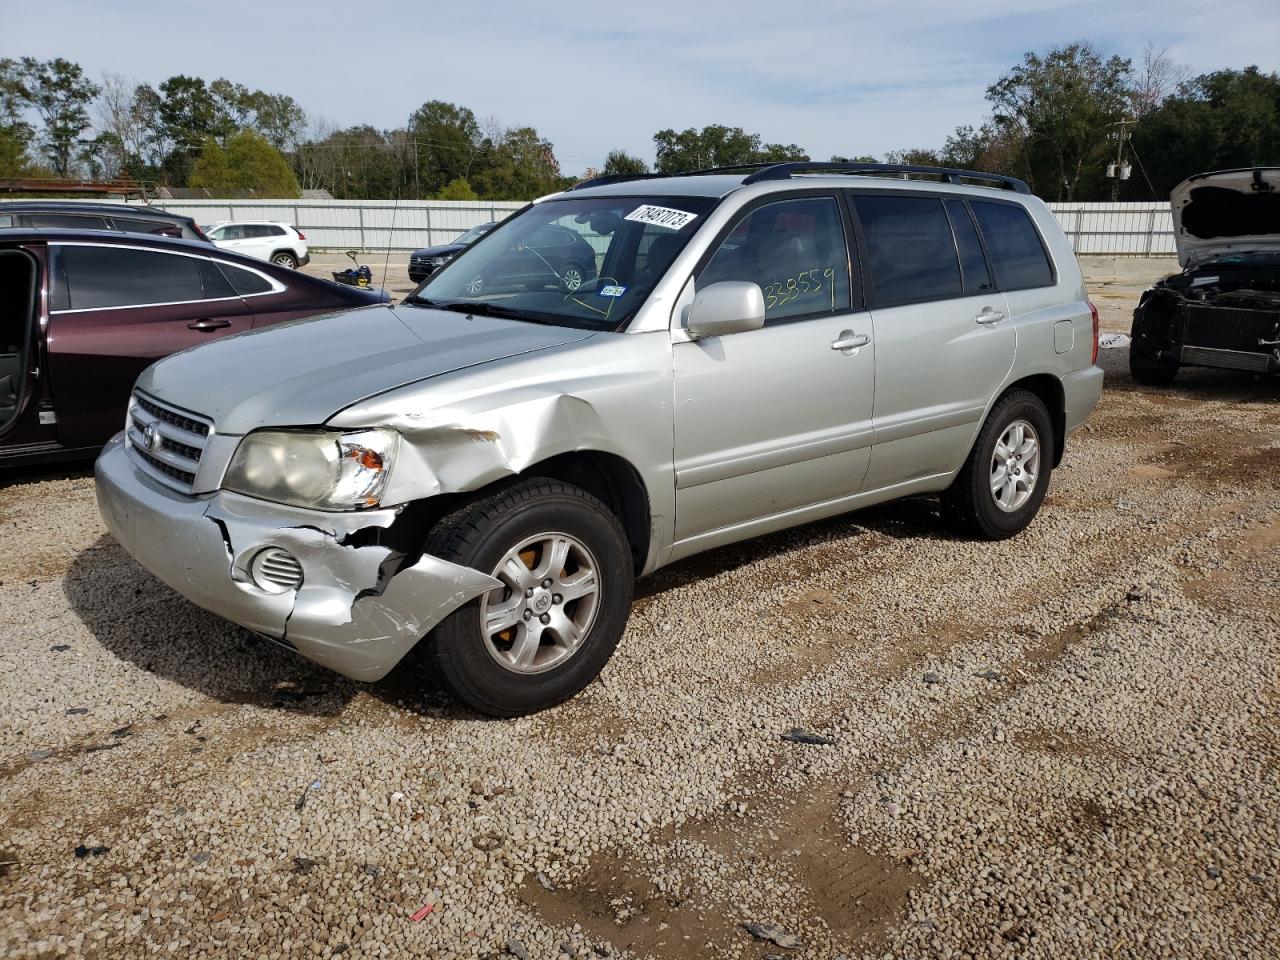 JTEGF21A130****** Salvage and Wrecked 2003 Toyota Highlander in AL - Theodore